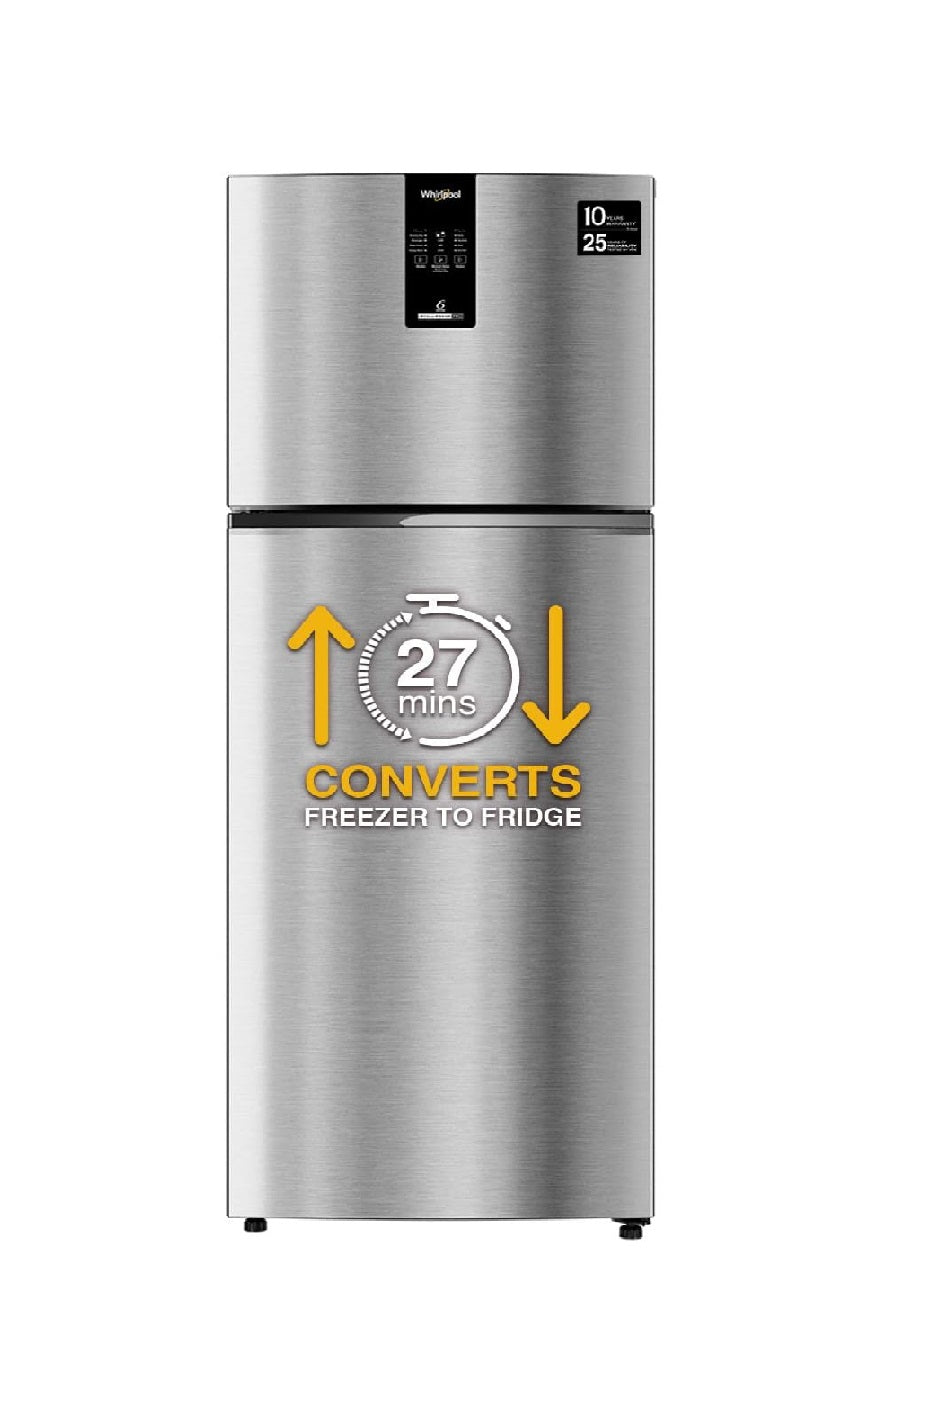 Whirlpool IFPRO INV CNV 327 L 2 Star Frost Free Double Door Refrigerator ILLUSIA STEEL (21688)